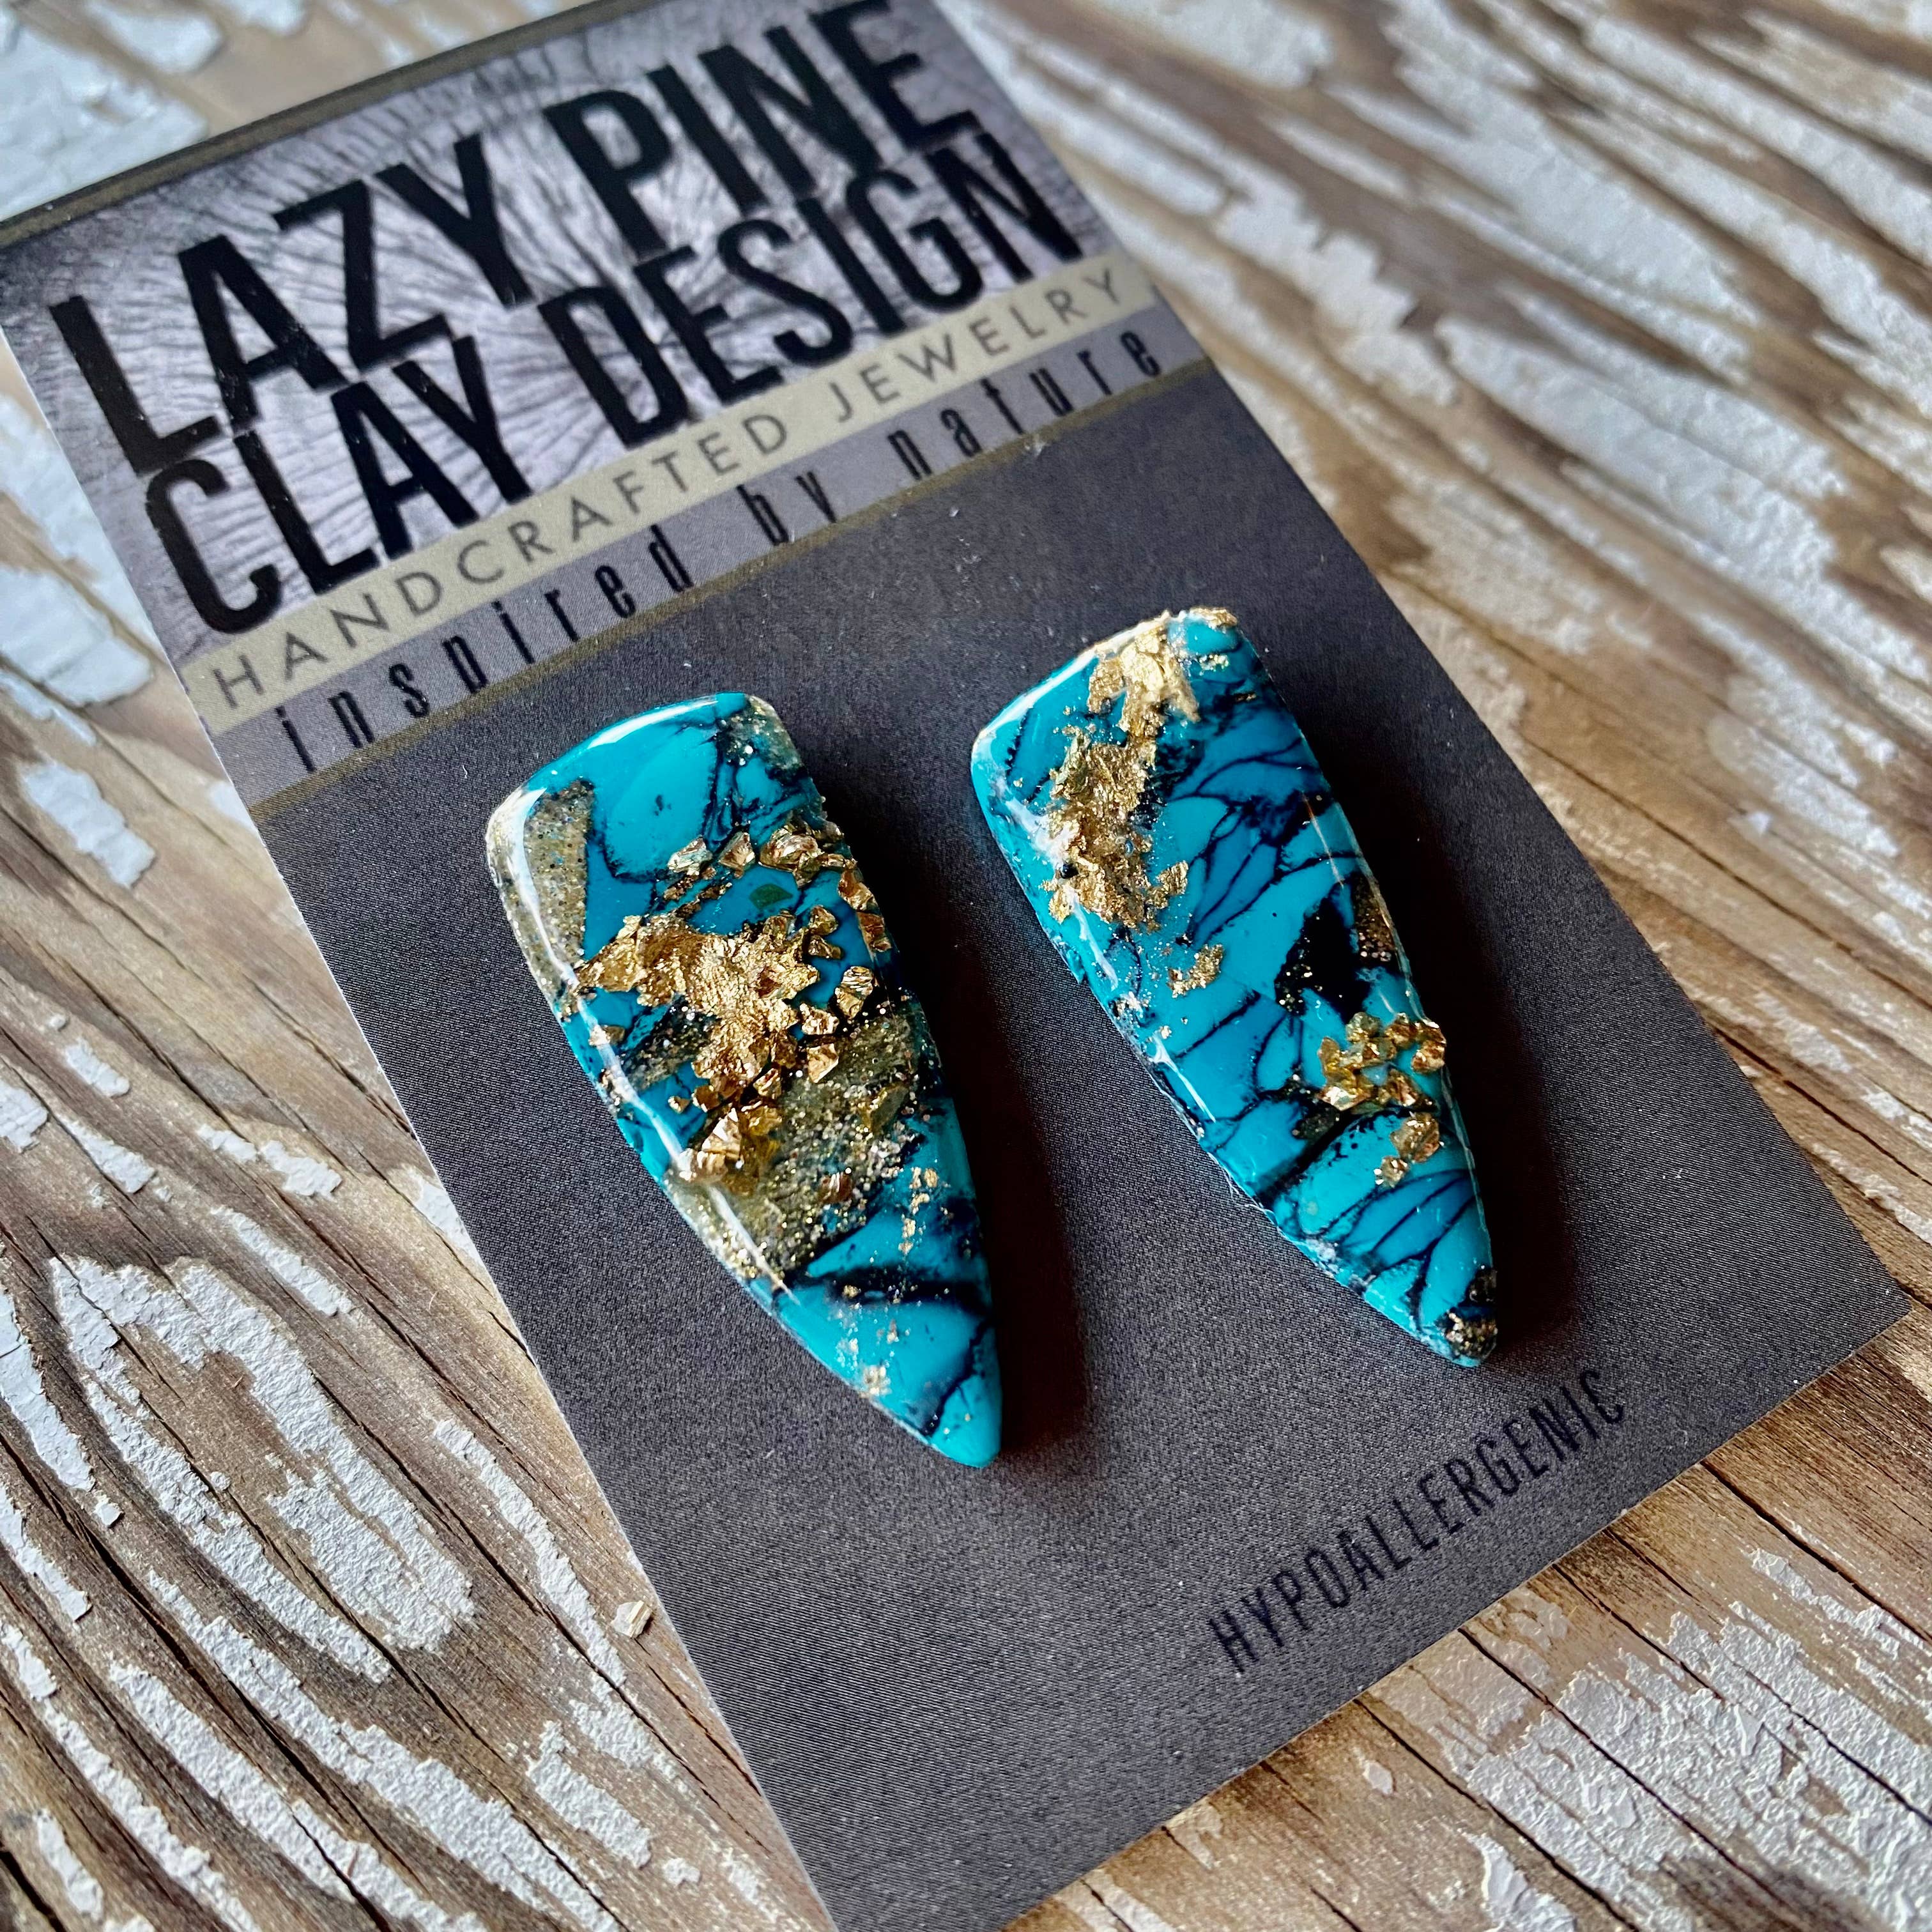 A Quilt Store Made of Polymer Clay - Lazy Girl Designs